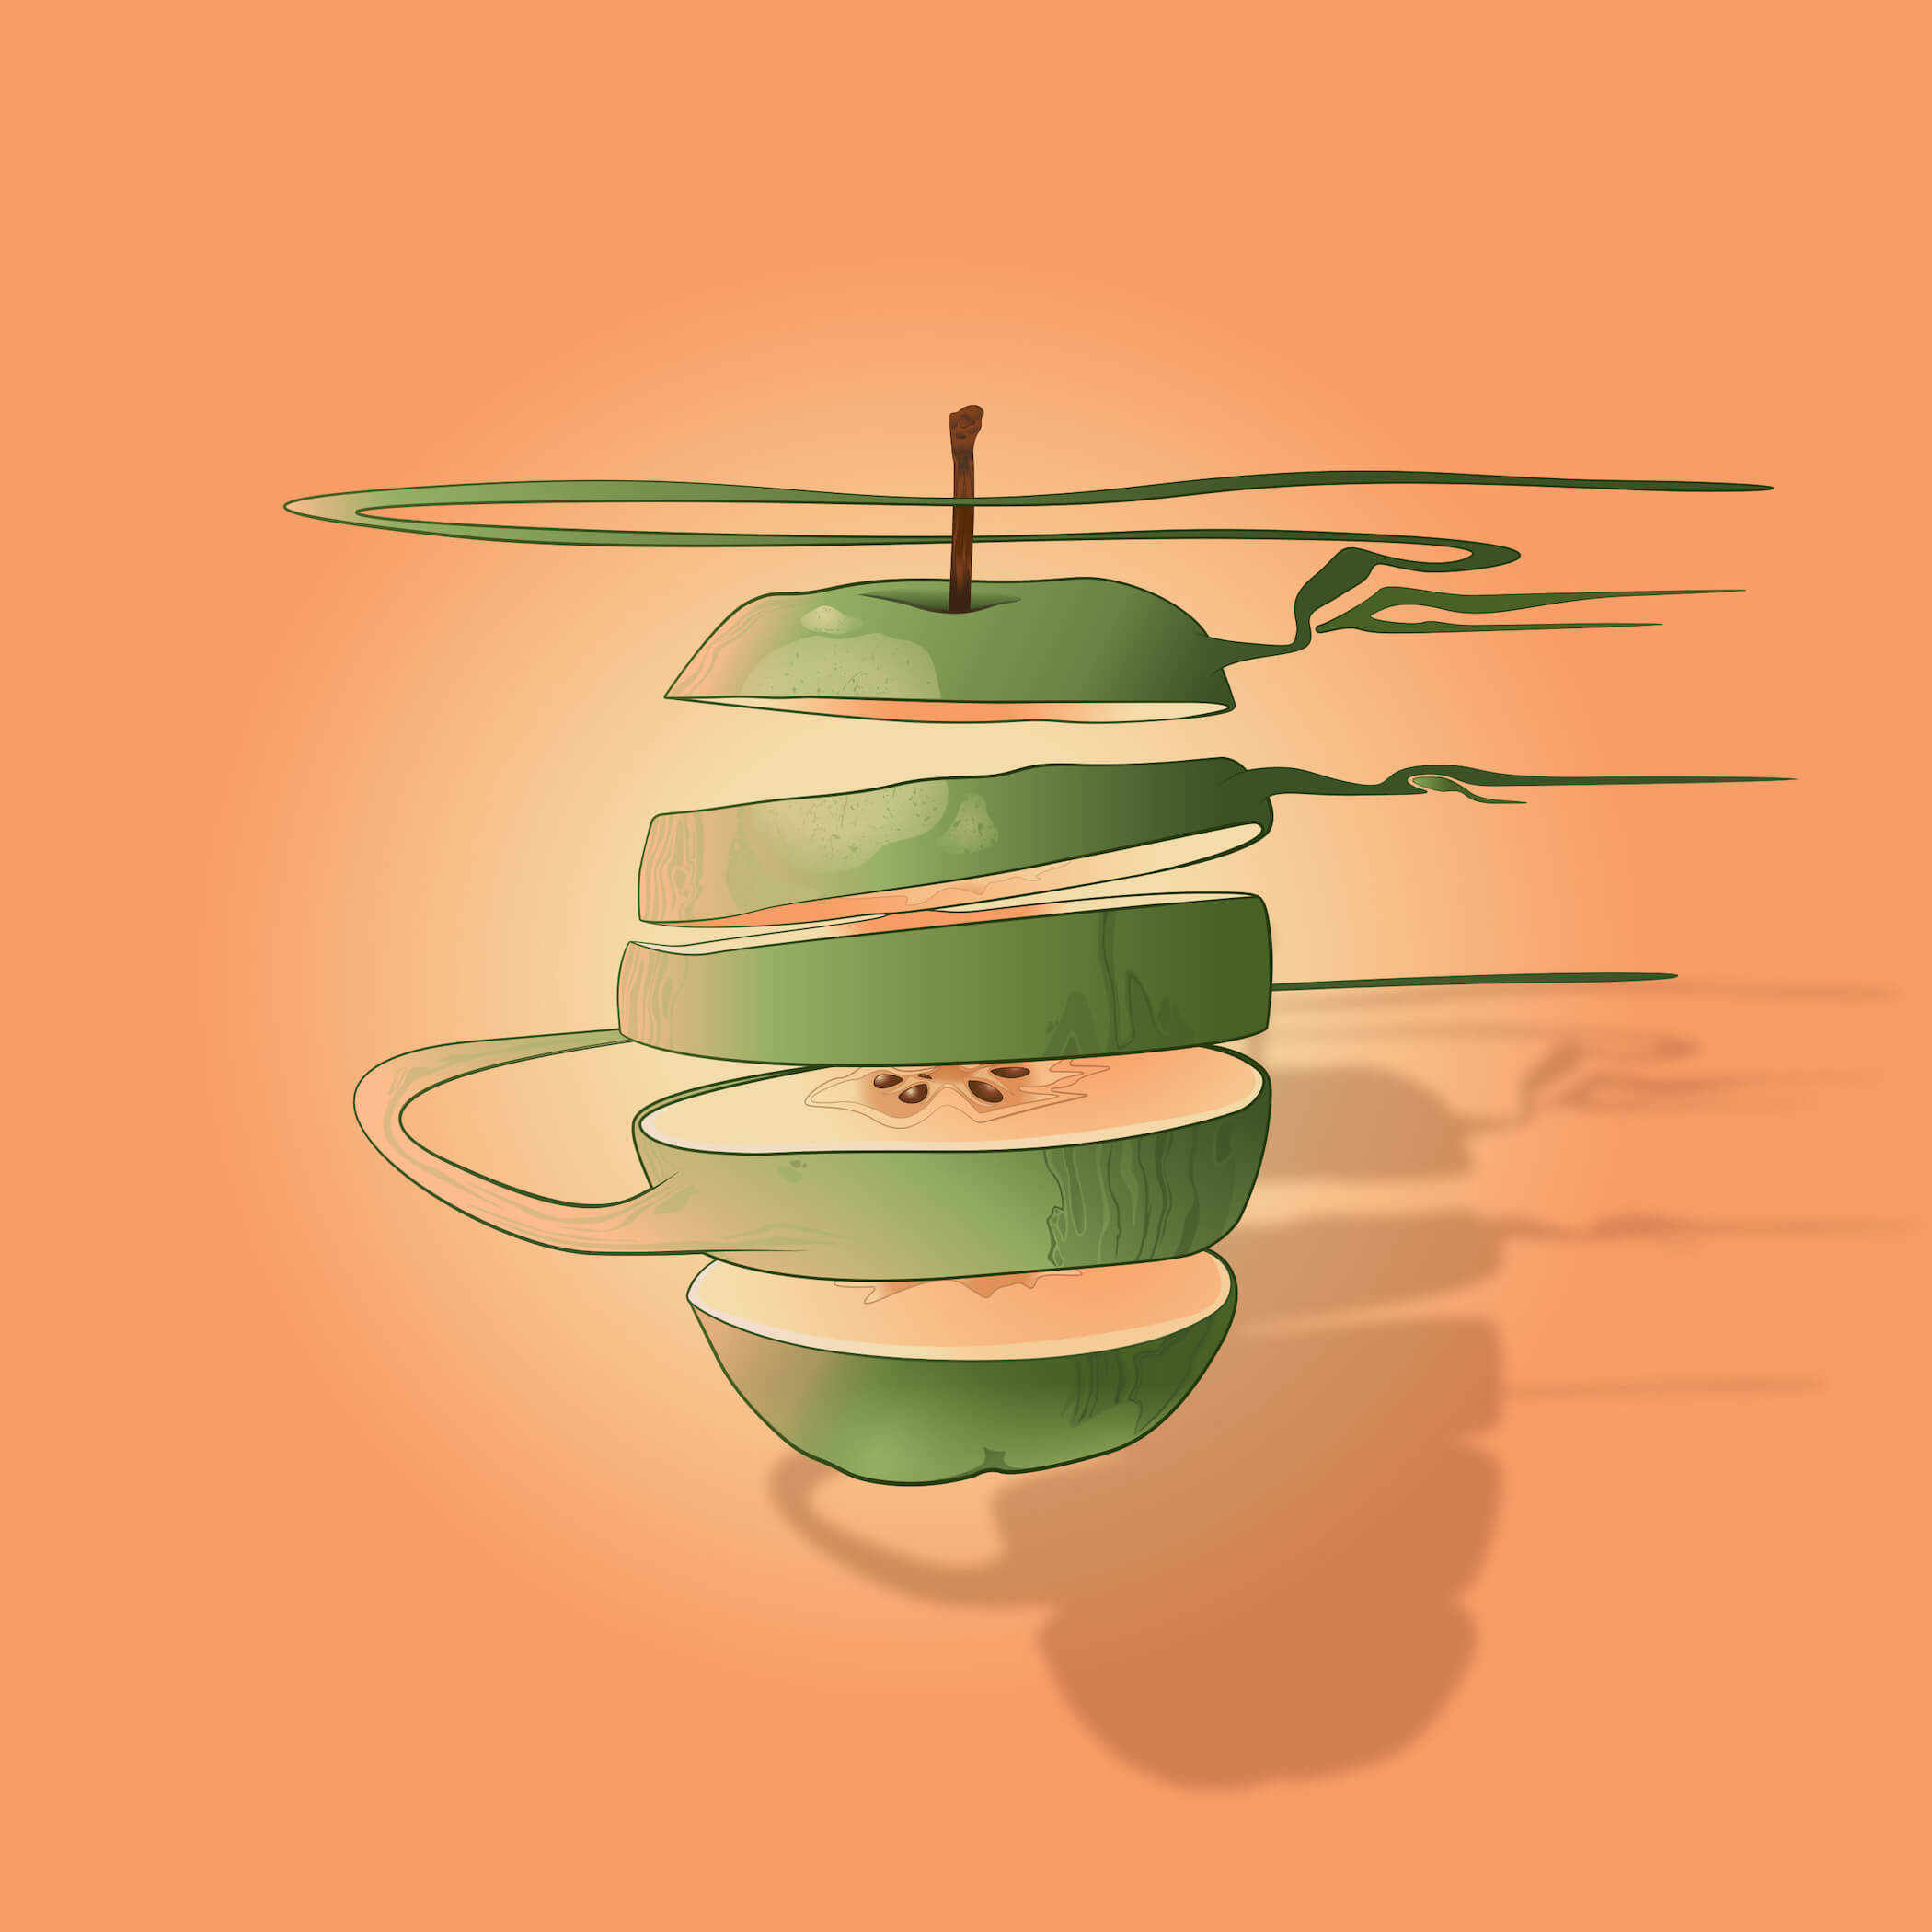 green apple sliced into a spiral